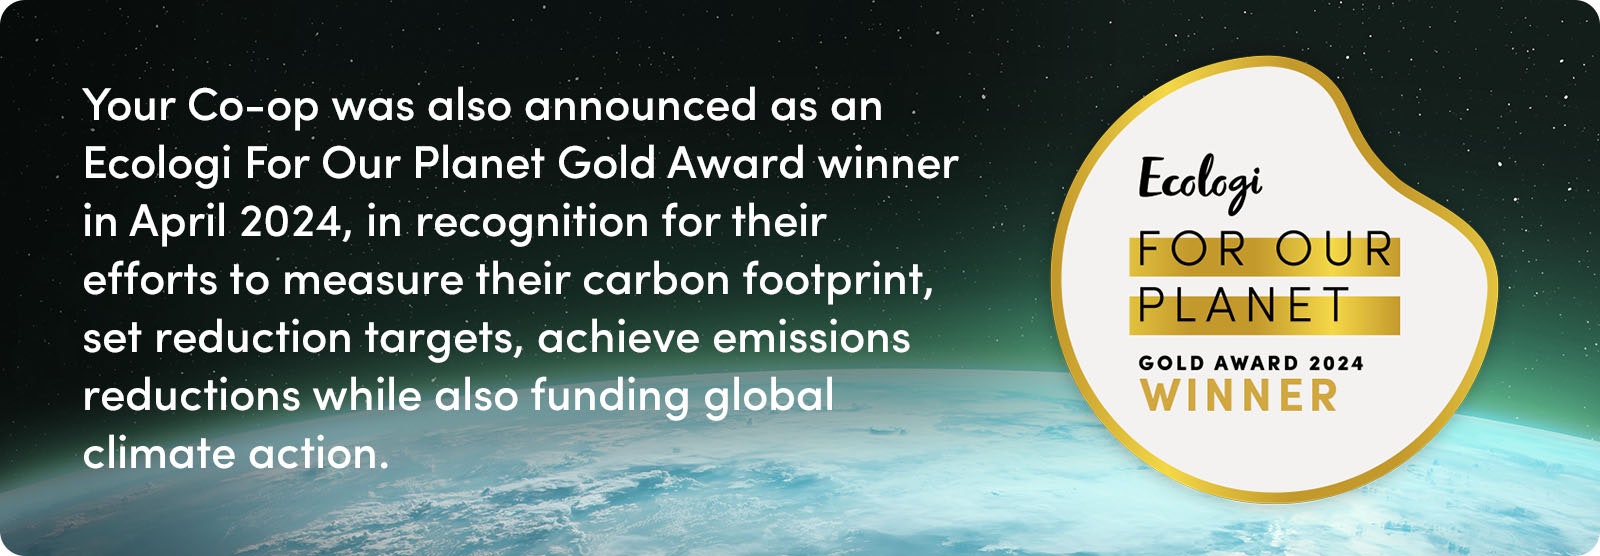 Your Co-op was also announced as an Ecologi For Our Planet Gold Award Winner in April 2024, in recognition for their efforts to measure their carbon footprint, set reduction targets, achieve emissions reductions while also funding global climate action.